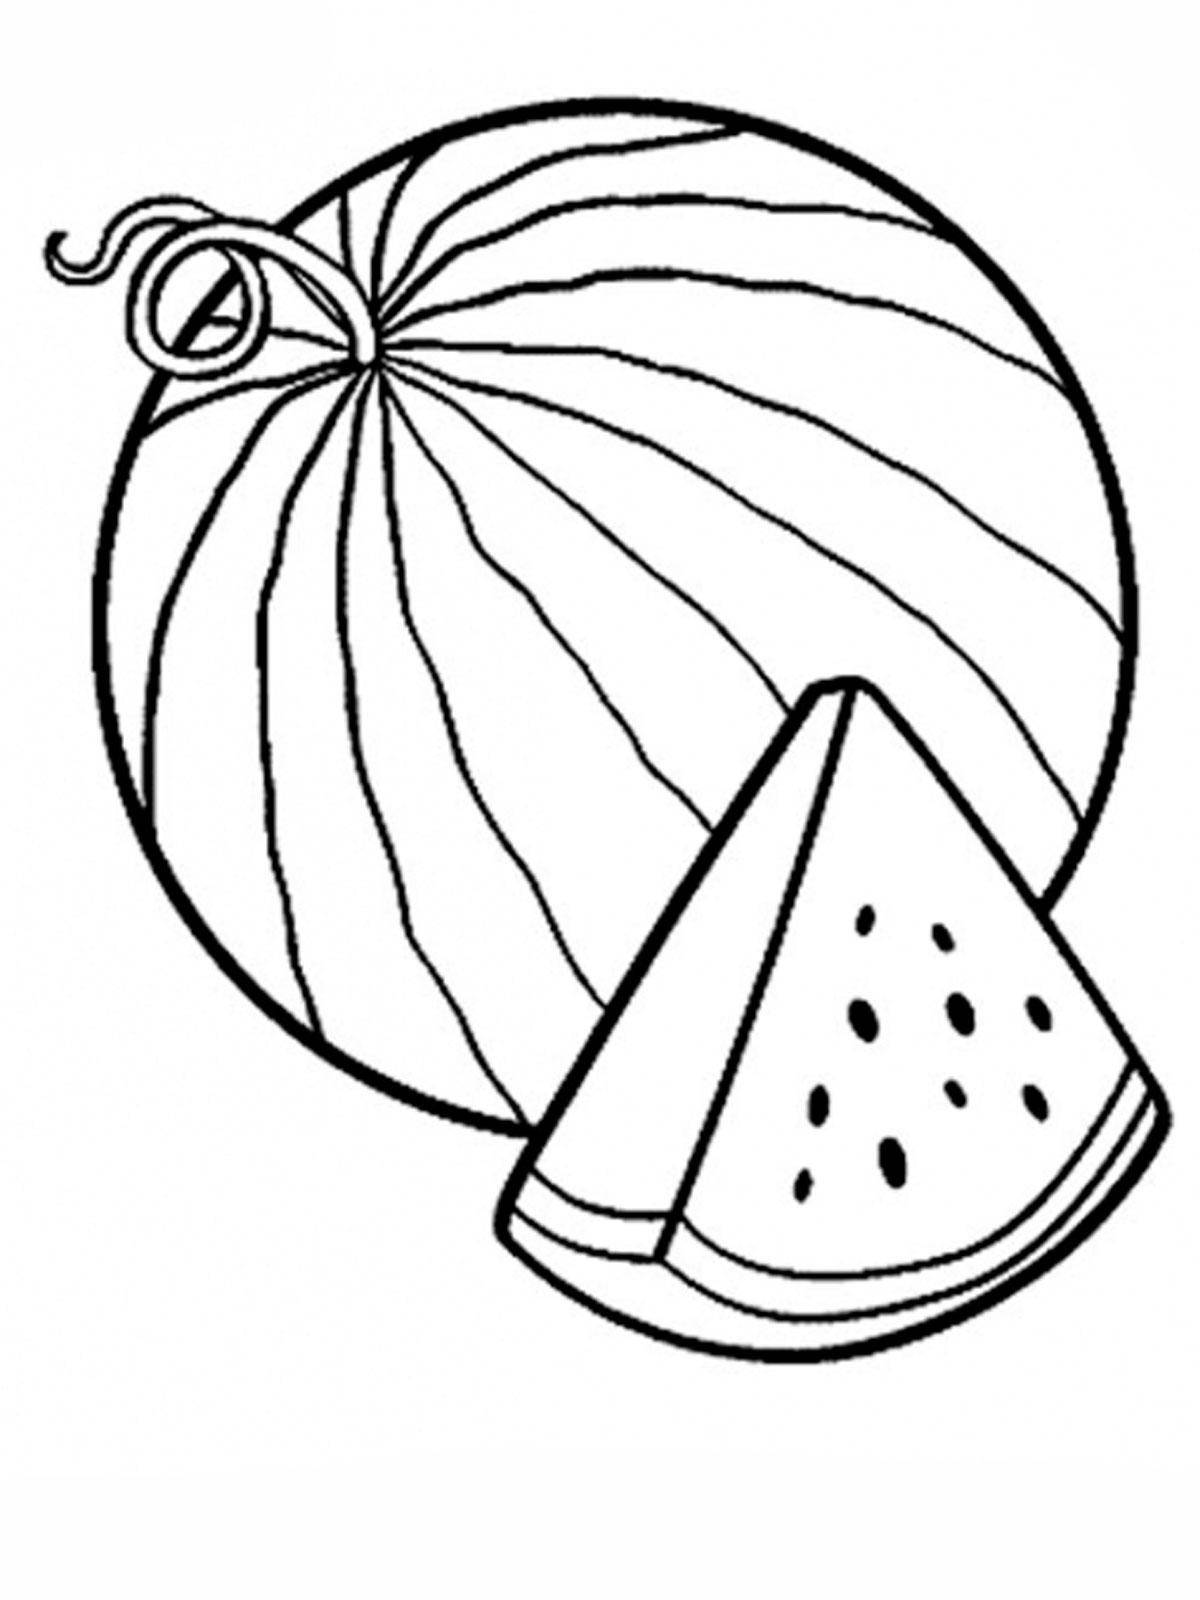 Coloring Striped Arbus. Category berries. Tags:  watermelon.